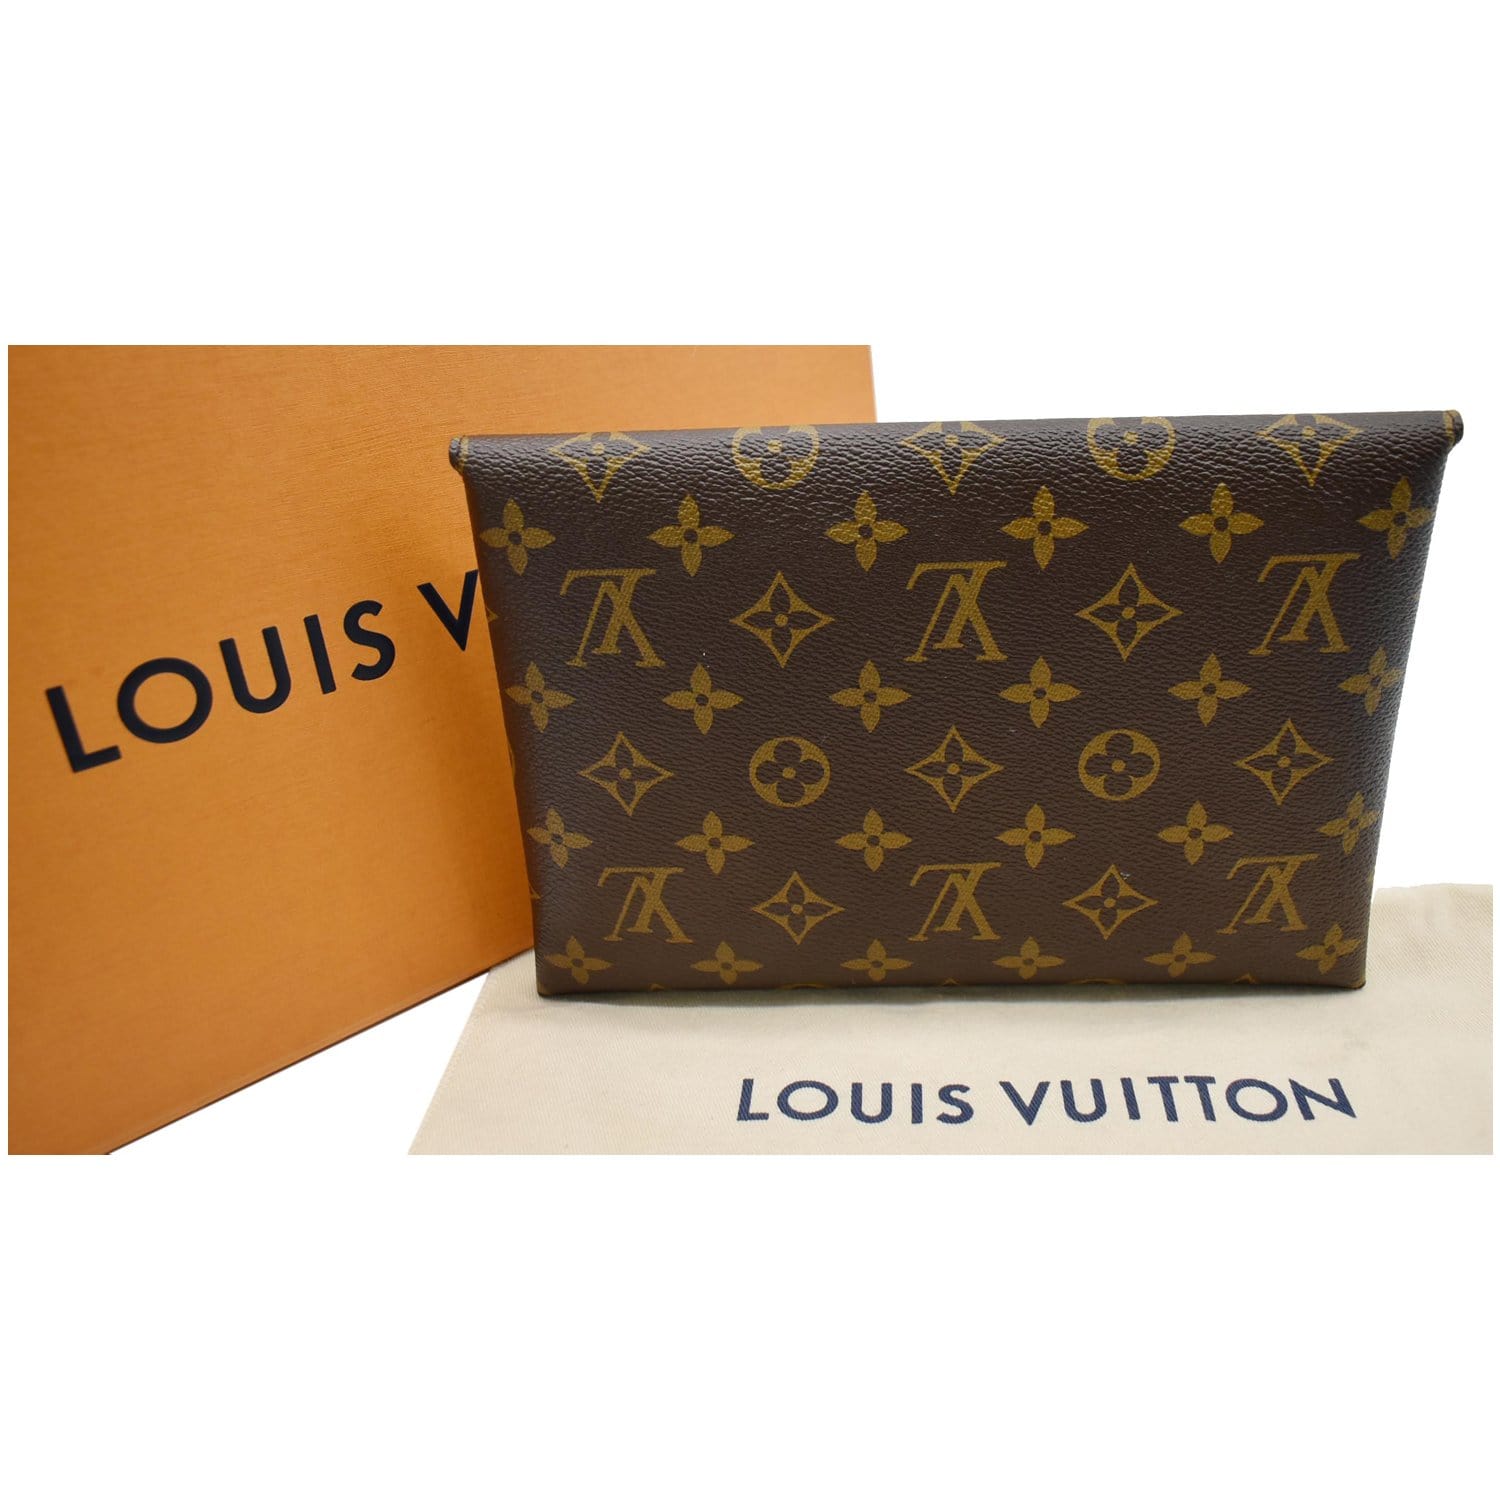 LOUIS VUITTON WHAT'S IN MY BAG  HOW I WEAR MY LOUIS VUITTON TOILETRY 26  AND LOUIS VUITTON KIRIGAMI? 